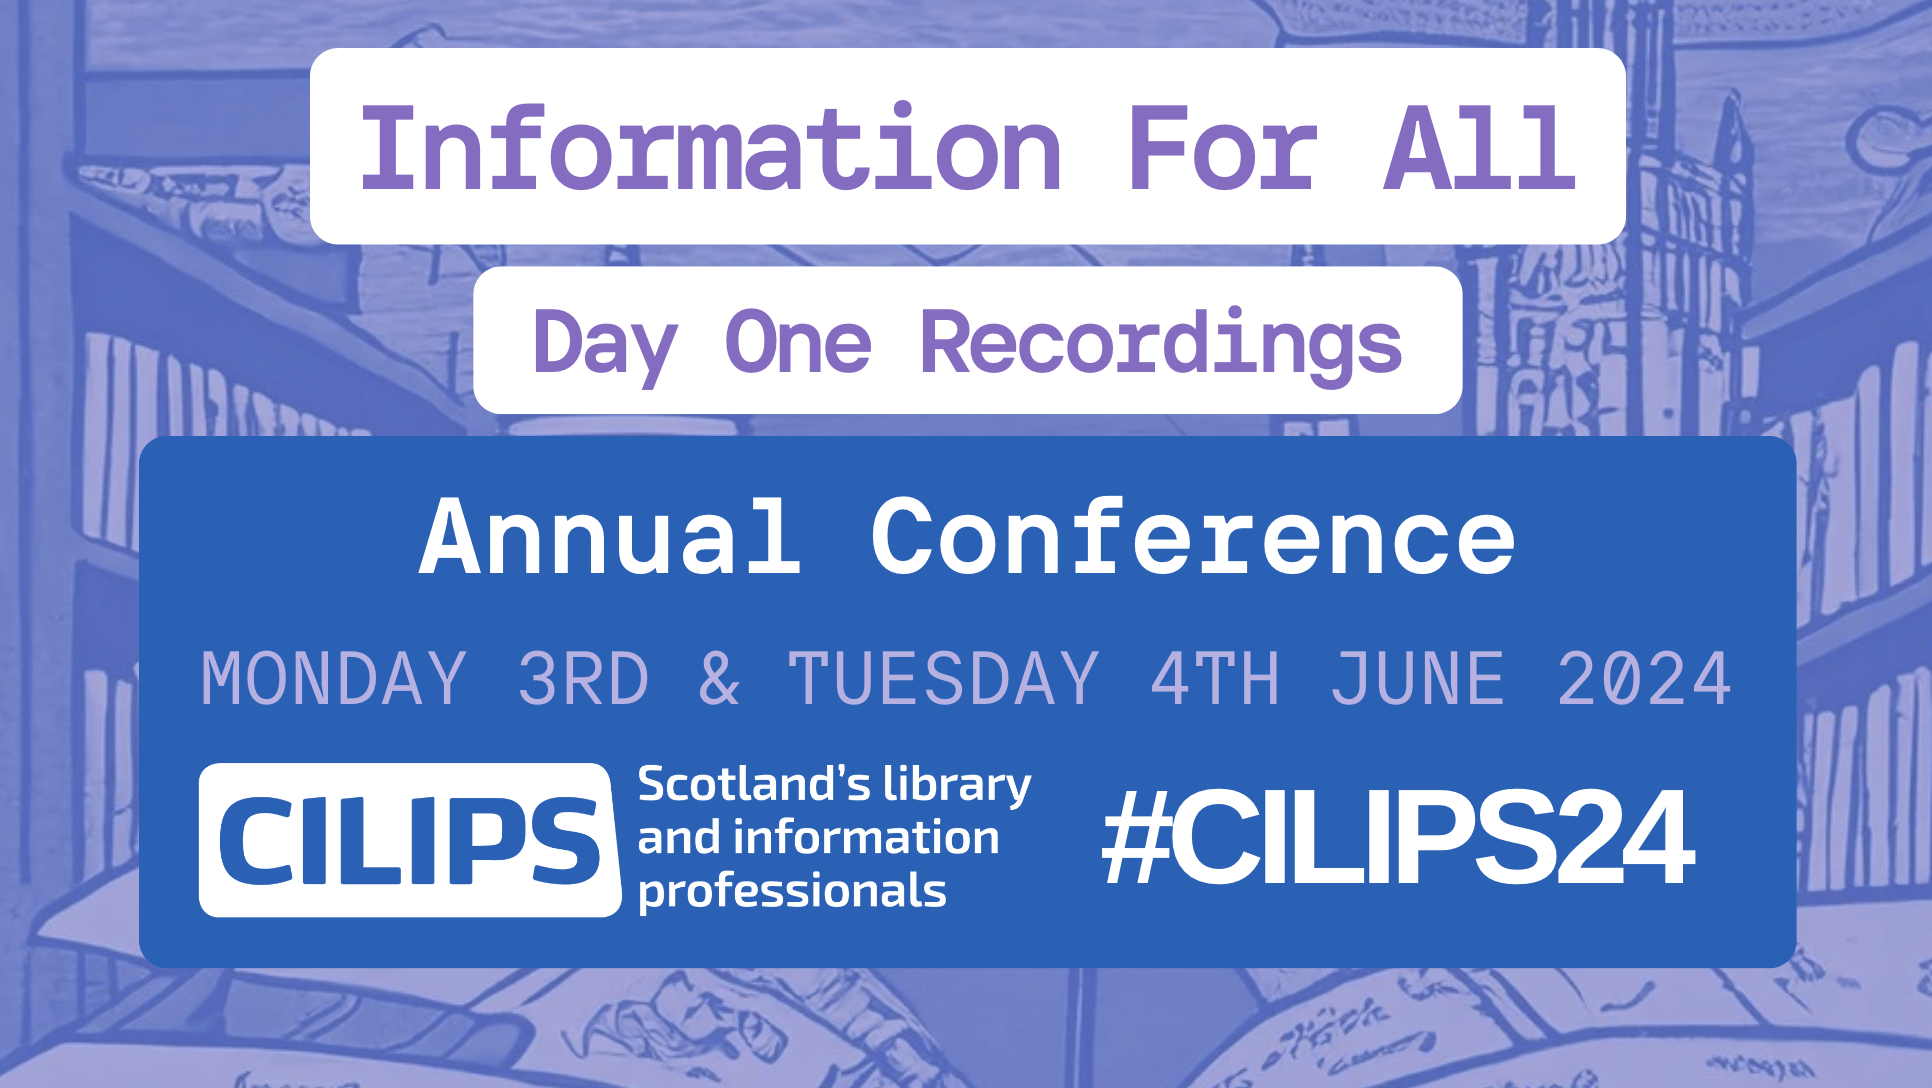 Information for all, day one recordings, annual conference, monday 3rd and tuesday 4th june, 2024. CILIPS White logo, #CILIPS24.